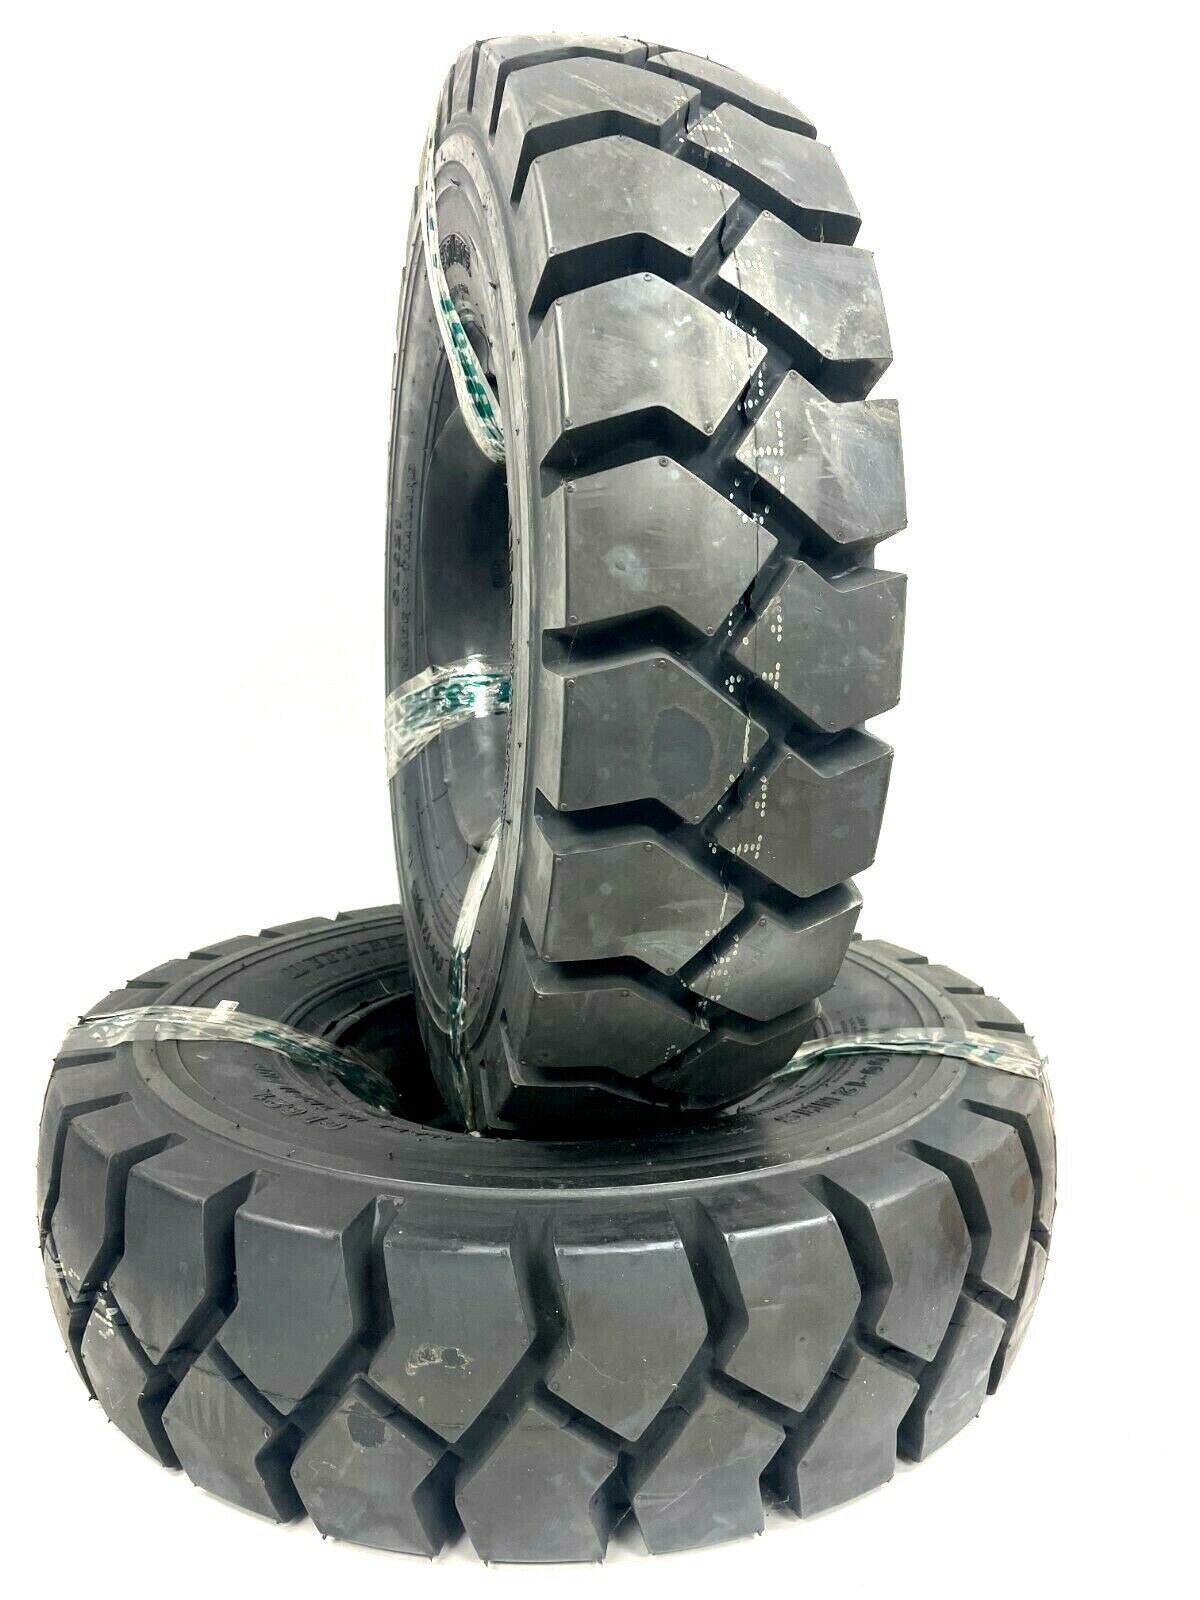 TWO new 7.00-12 FORKLIFT TIRE With Tubes, Flap Grip Plus Heavy duty 700-12